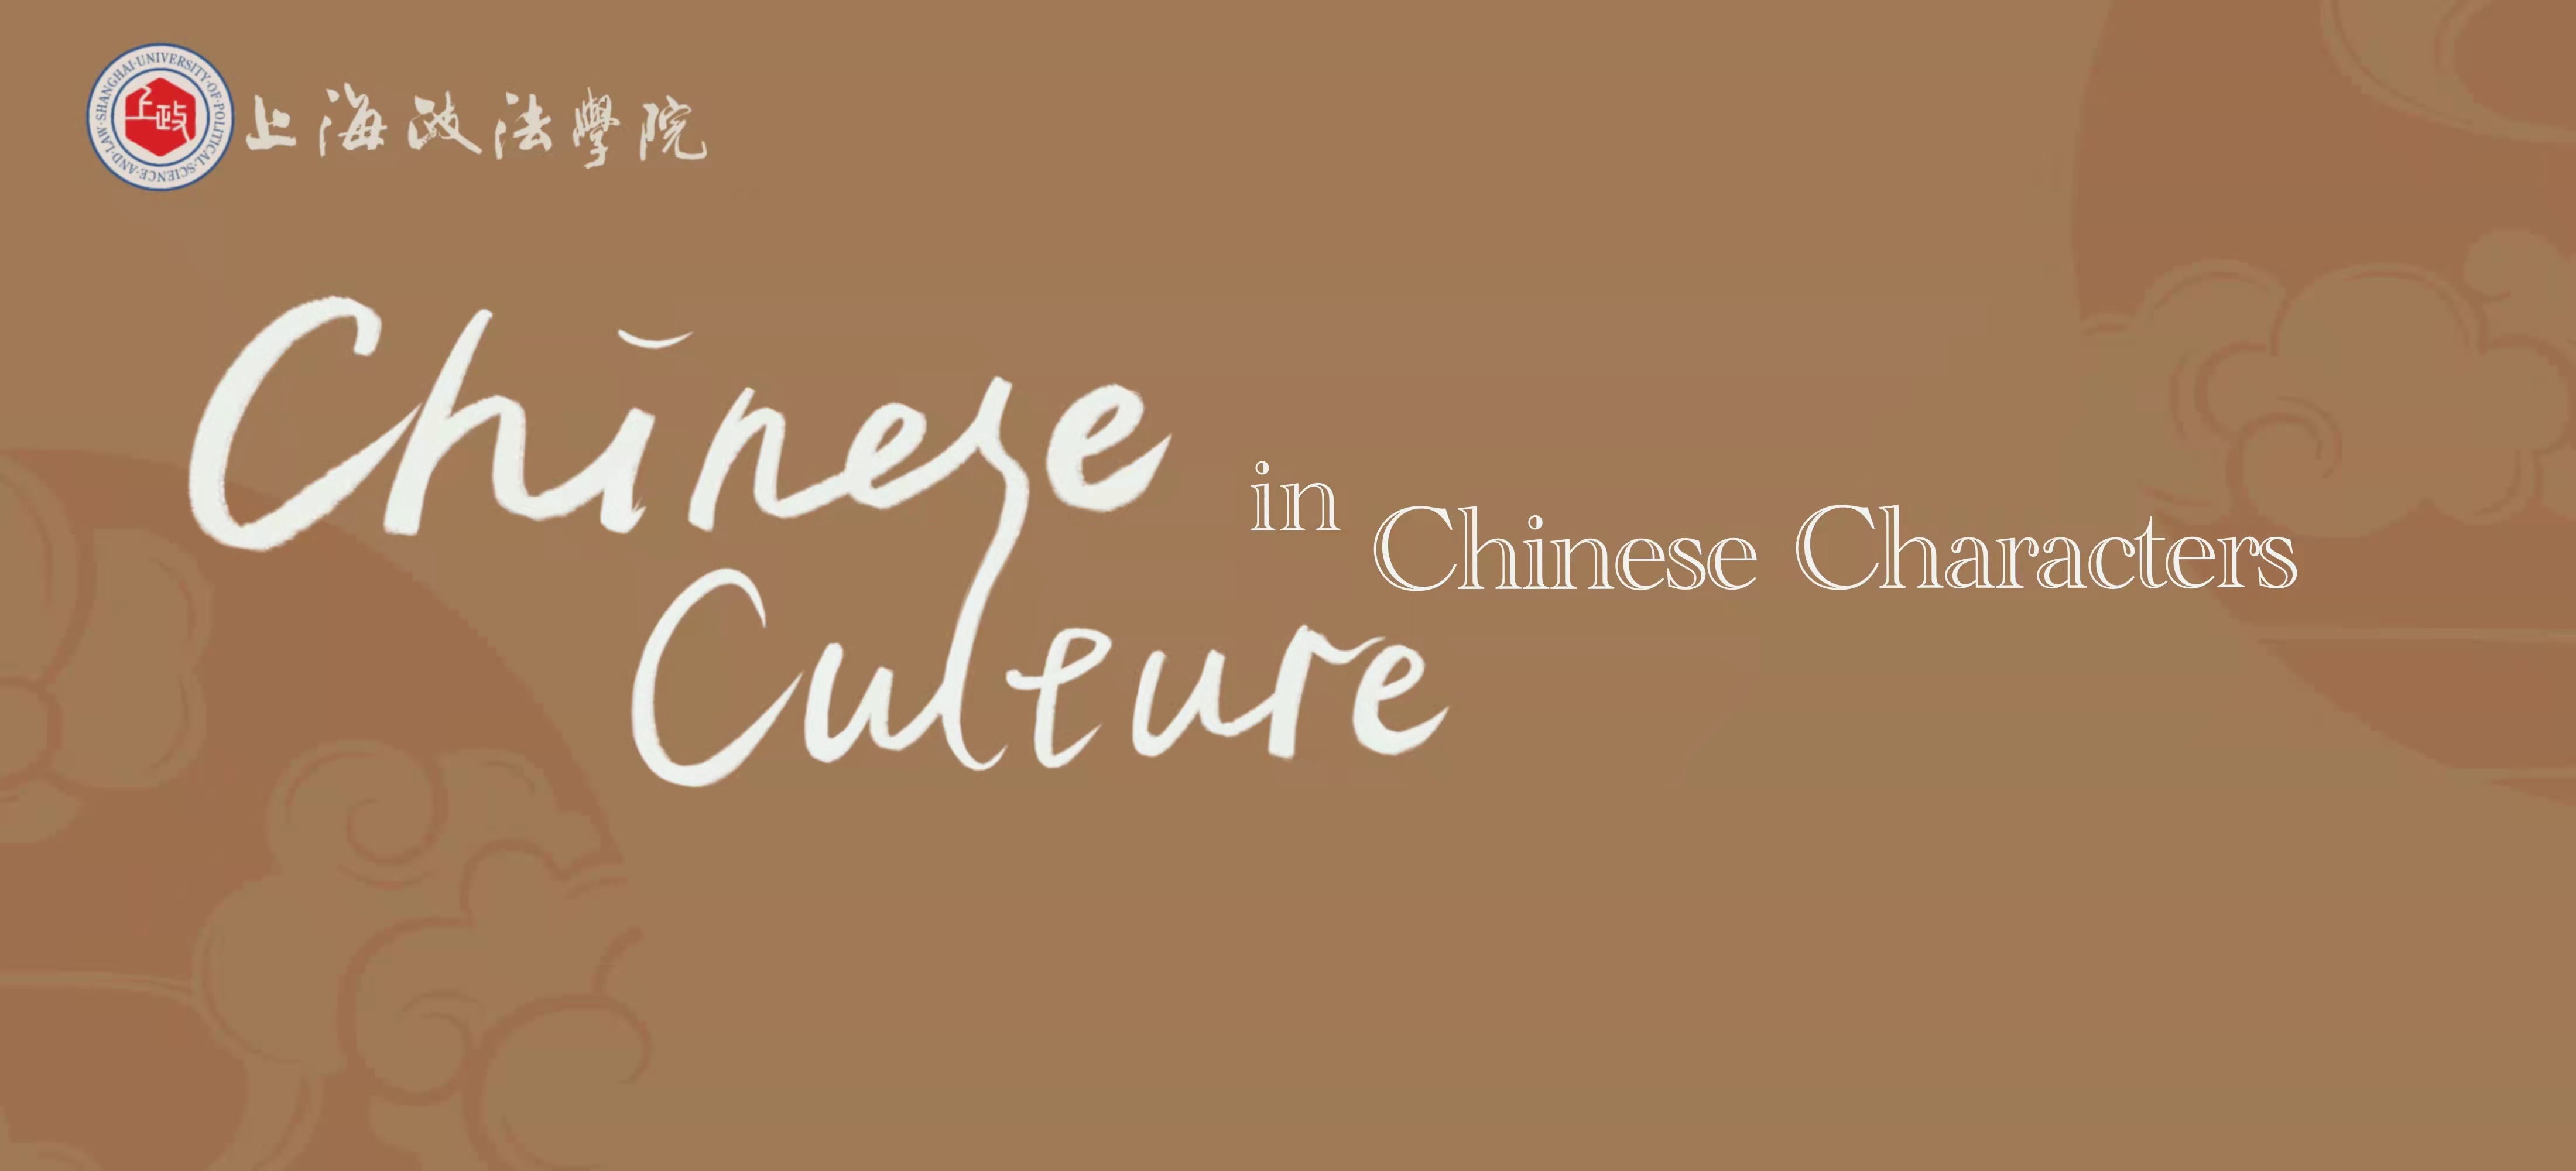 Chinese Culture in Chinese Characters